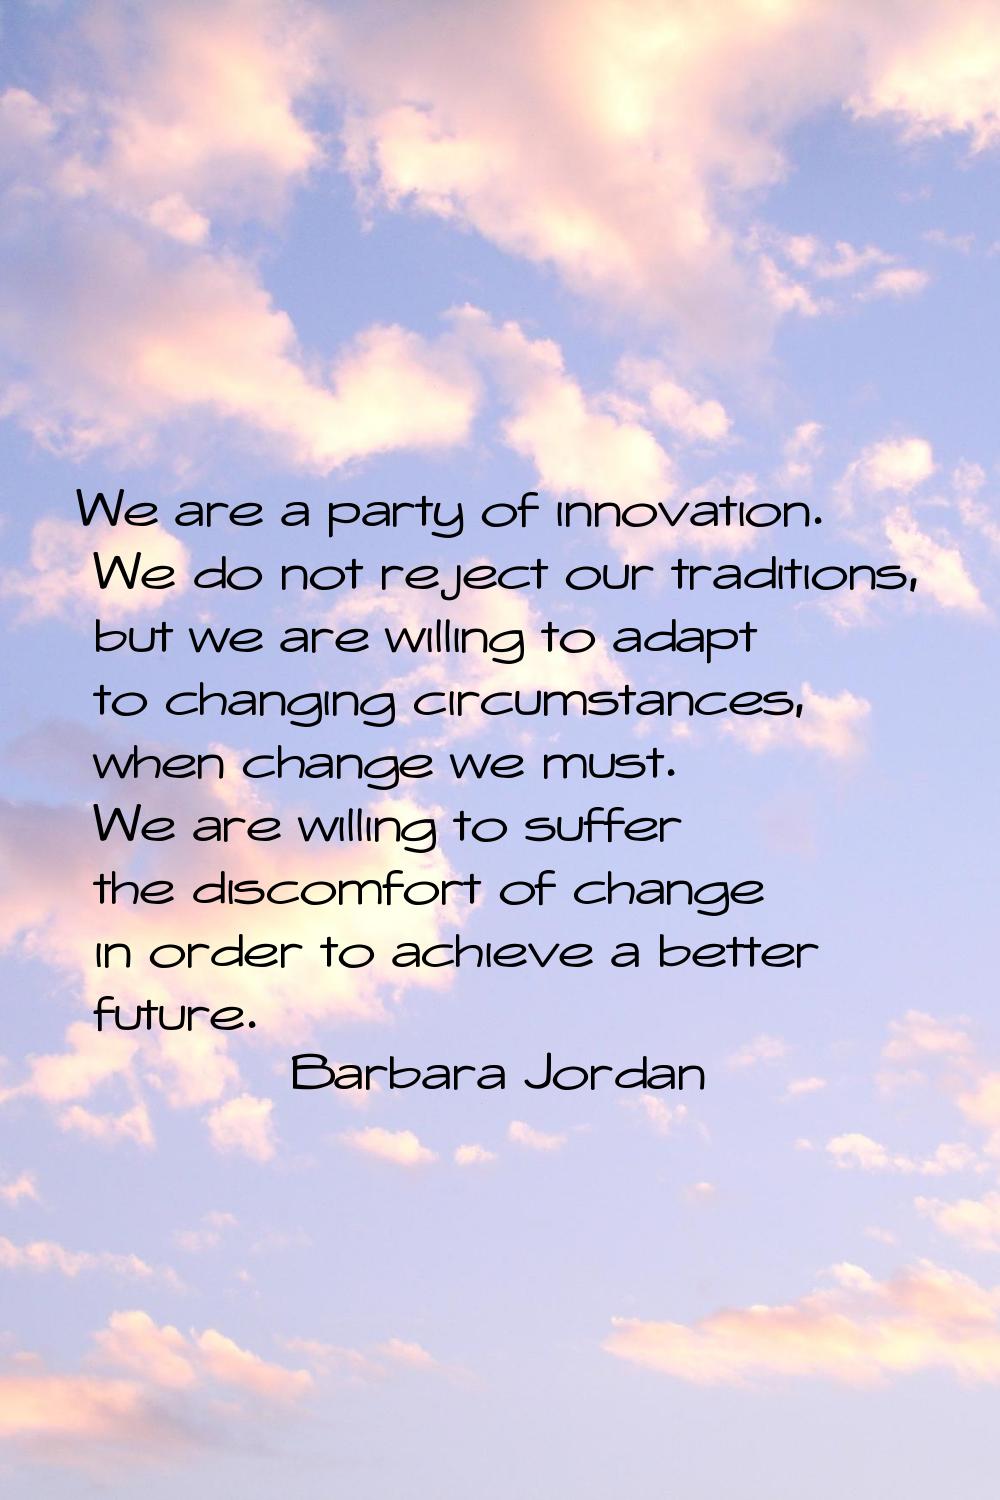 We are a party of innovation. We do not reject our traditions, but we are willing to adapt to chang